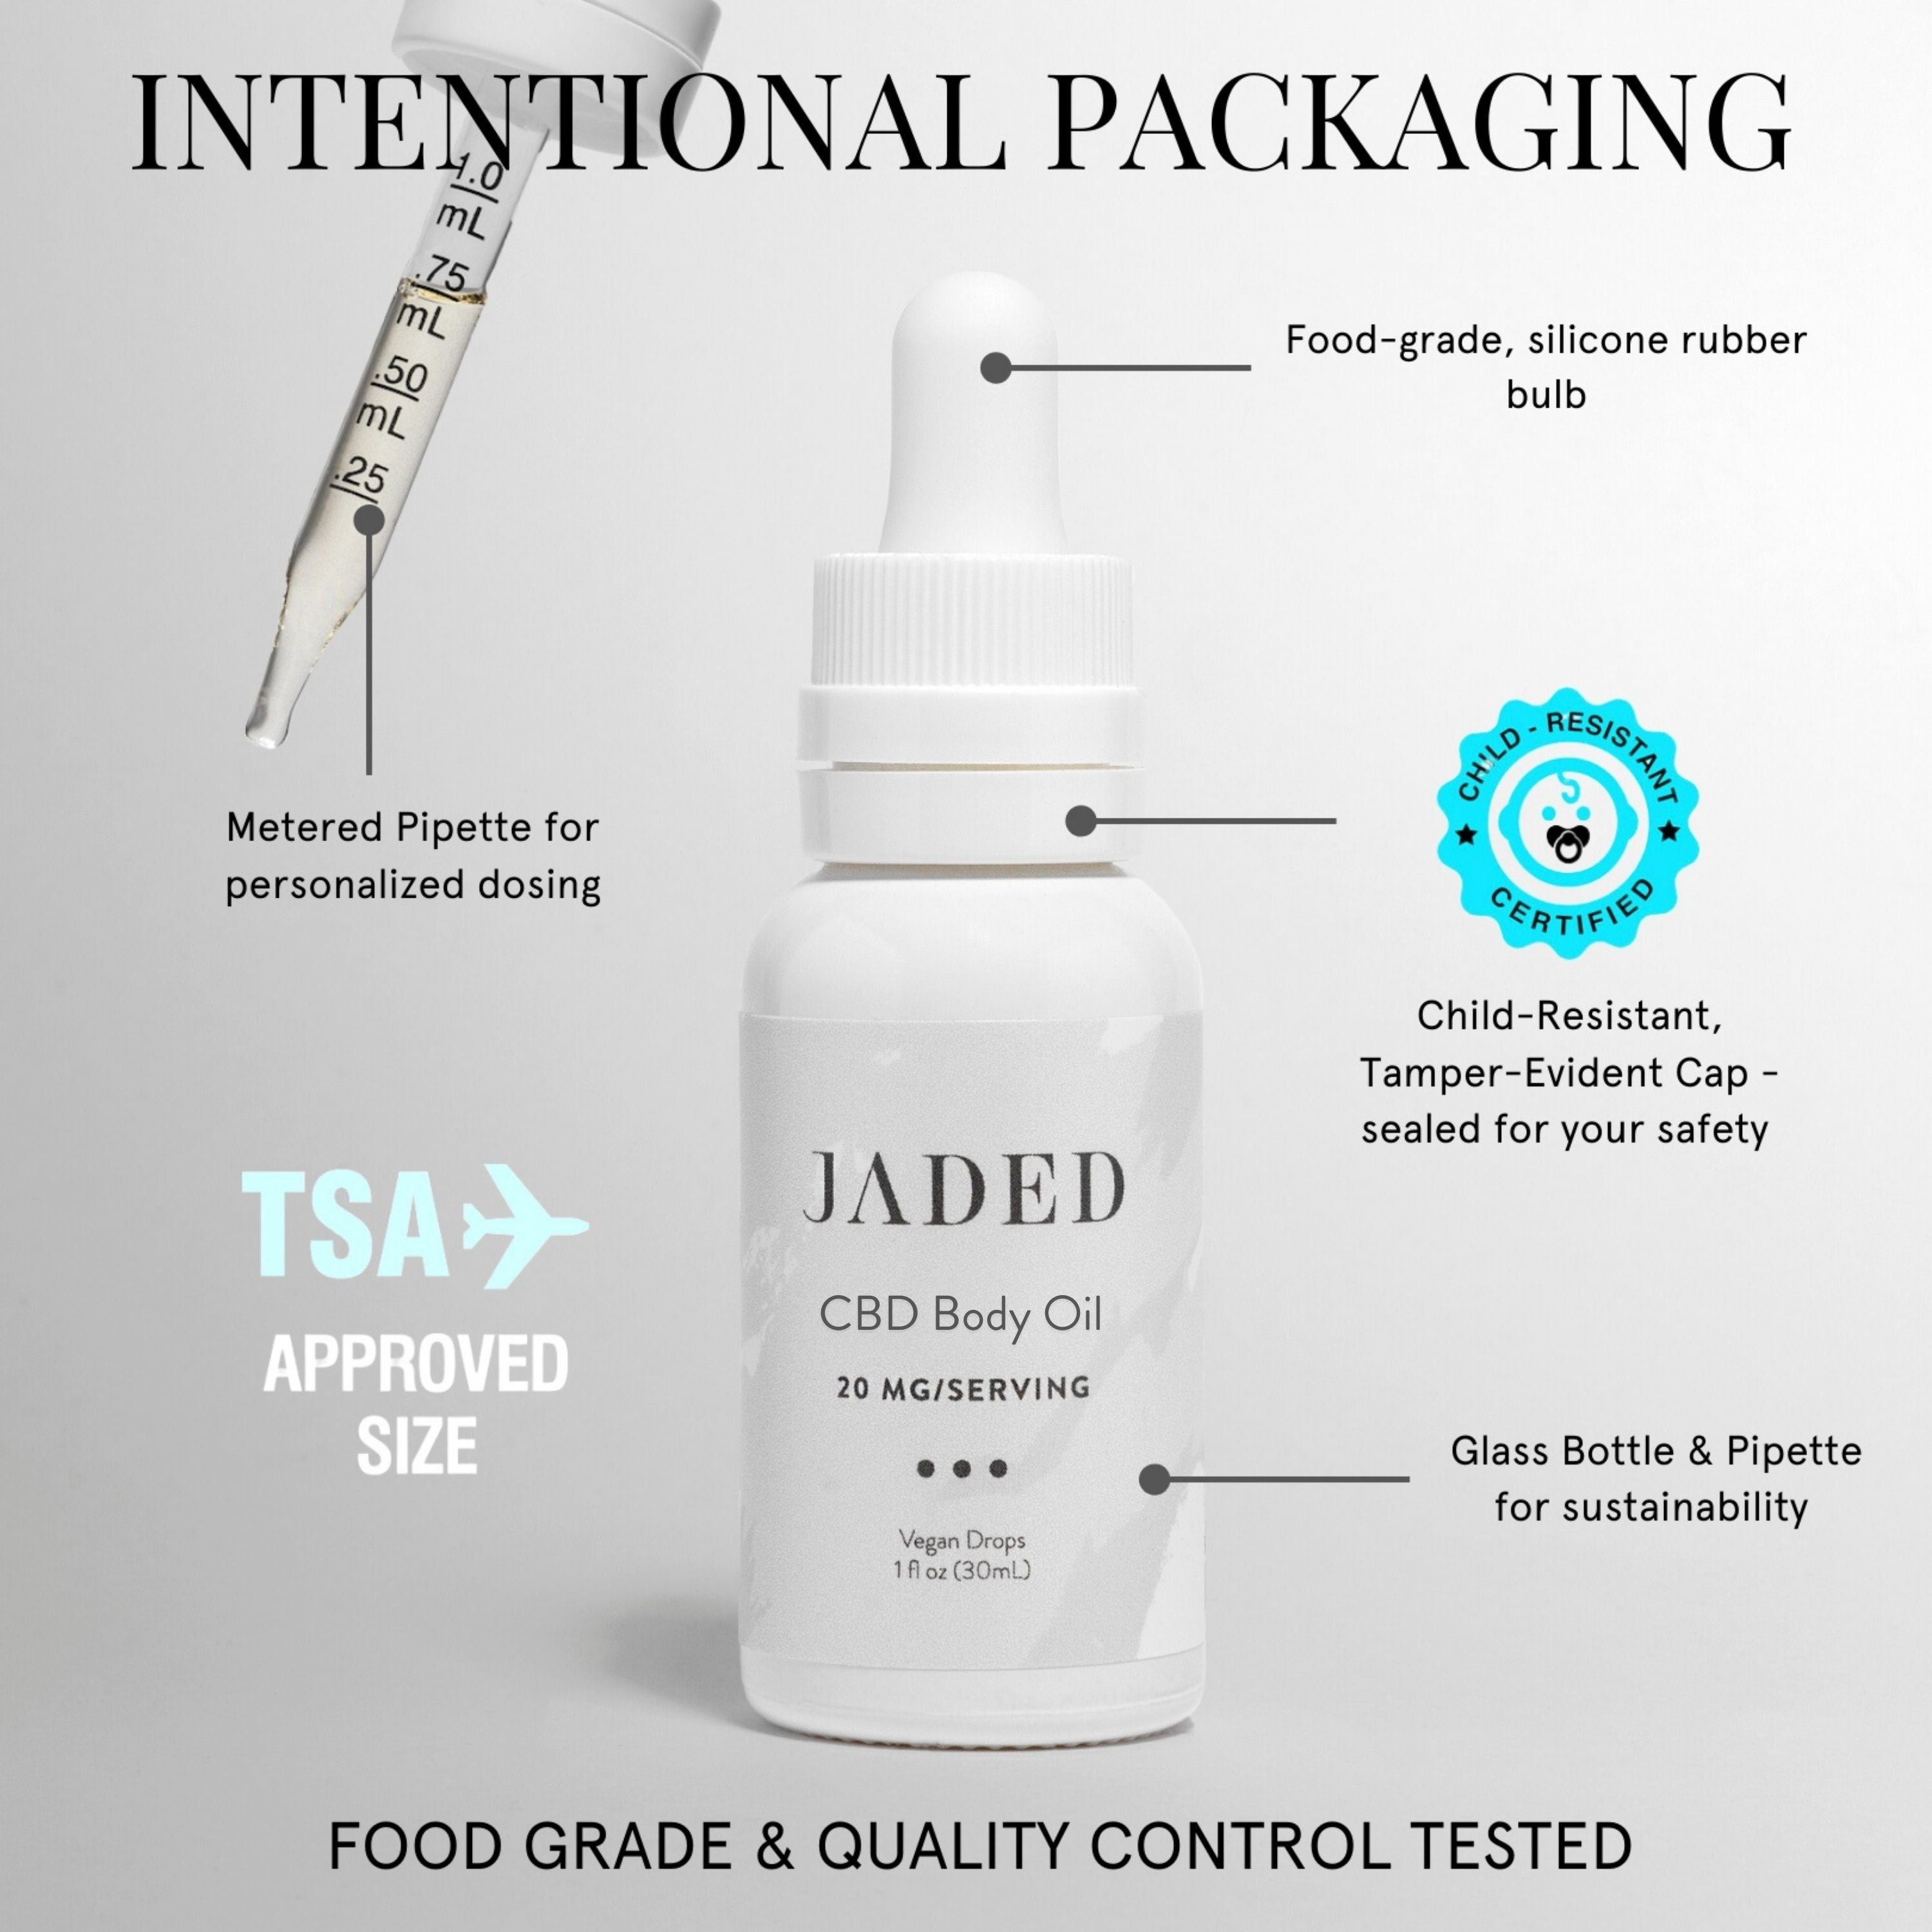 Intentional Packaging of JADED CBD Body Oil